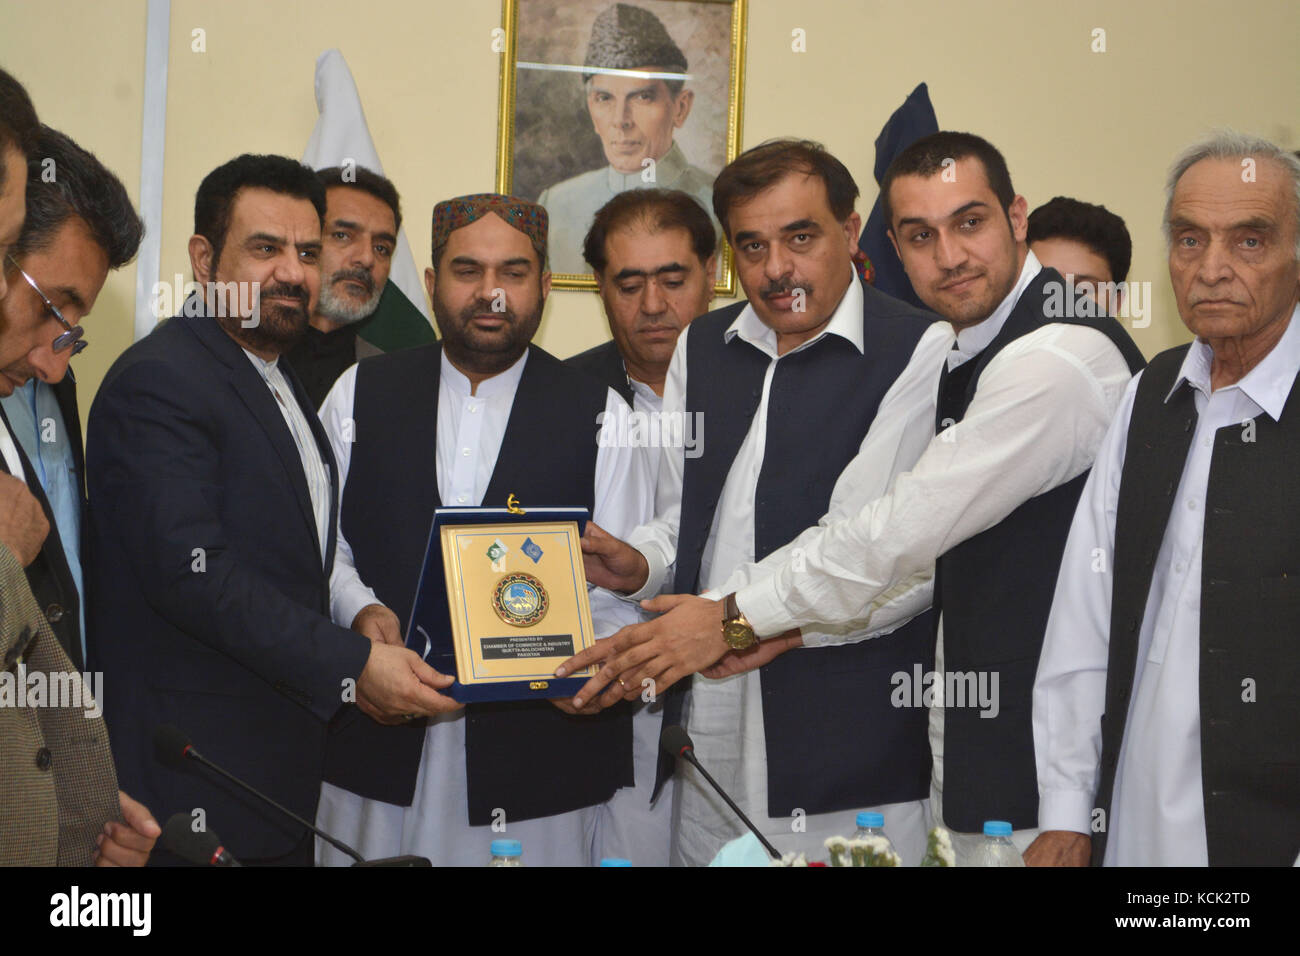 Quetta, Pakistan. 6th Oct, 2017. Council General of Islamic Republic of Iran Mr. Rafiee Muhammad receiving the memorable shield from Patron in chief Mr. Ghulam Farooq and Senior vice president Mr. Muhammad Ayoub Khilji after meeting regarding increasing of Pak-Iran Trade held at chamber of commerce and industries head office. Credit: Din Muhammad Watanpaal/ZMA Photos/Alamy Live News Stock Photo